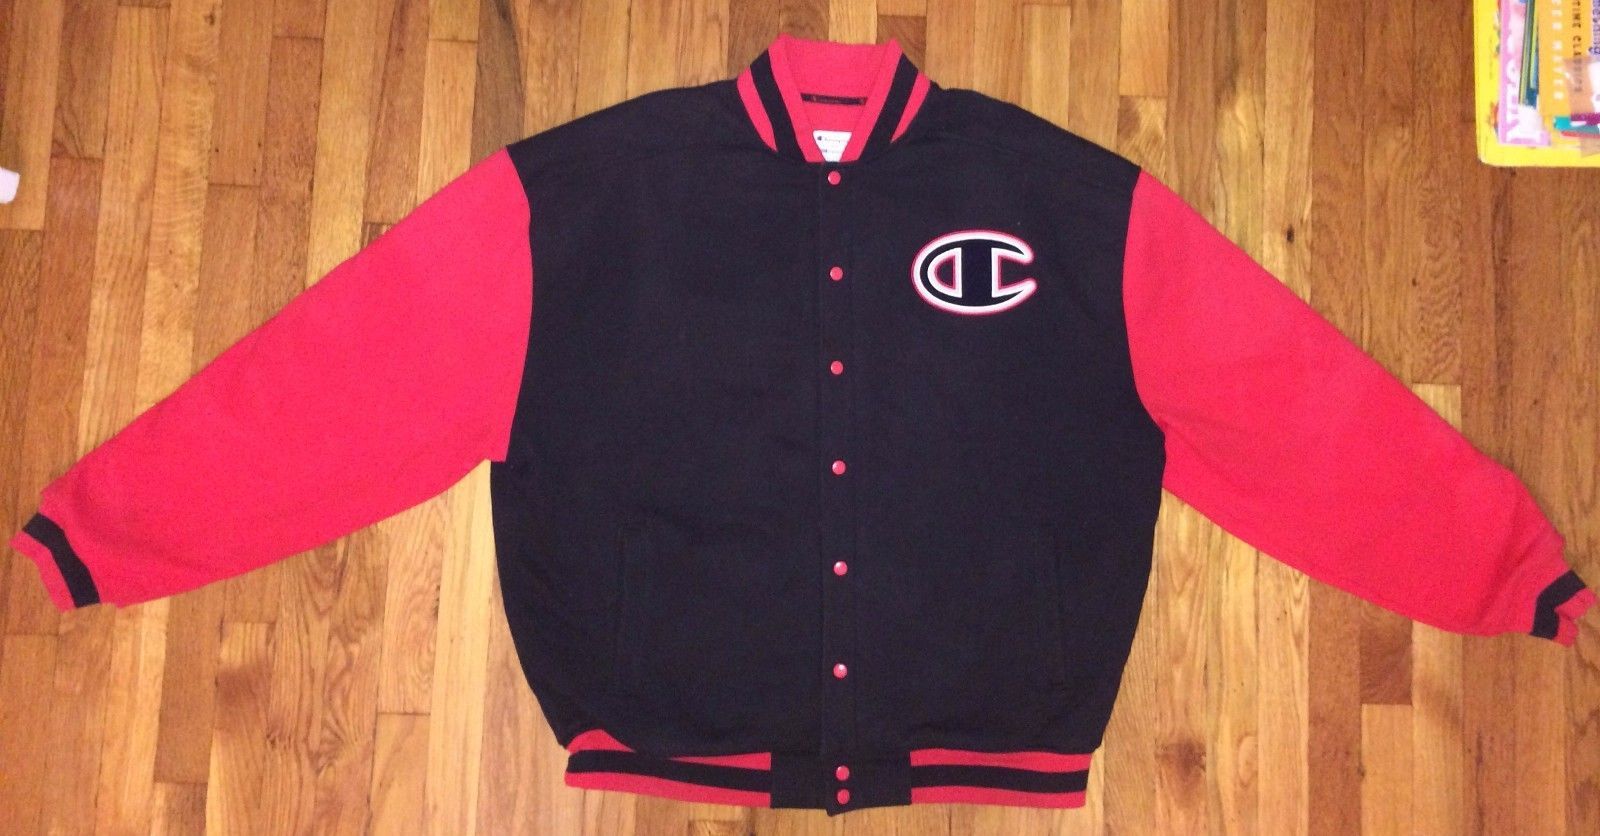 red and black champion jacket